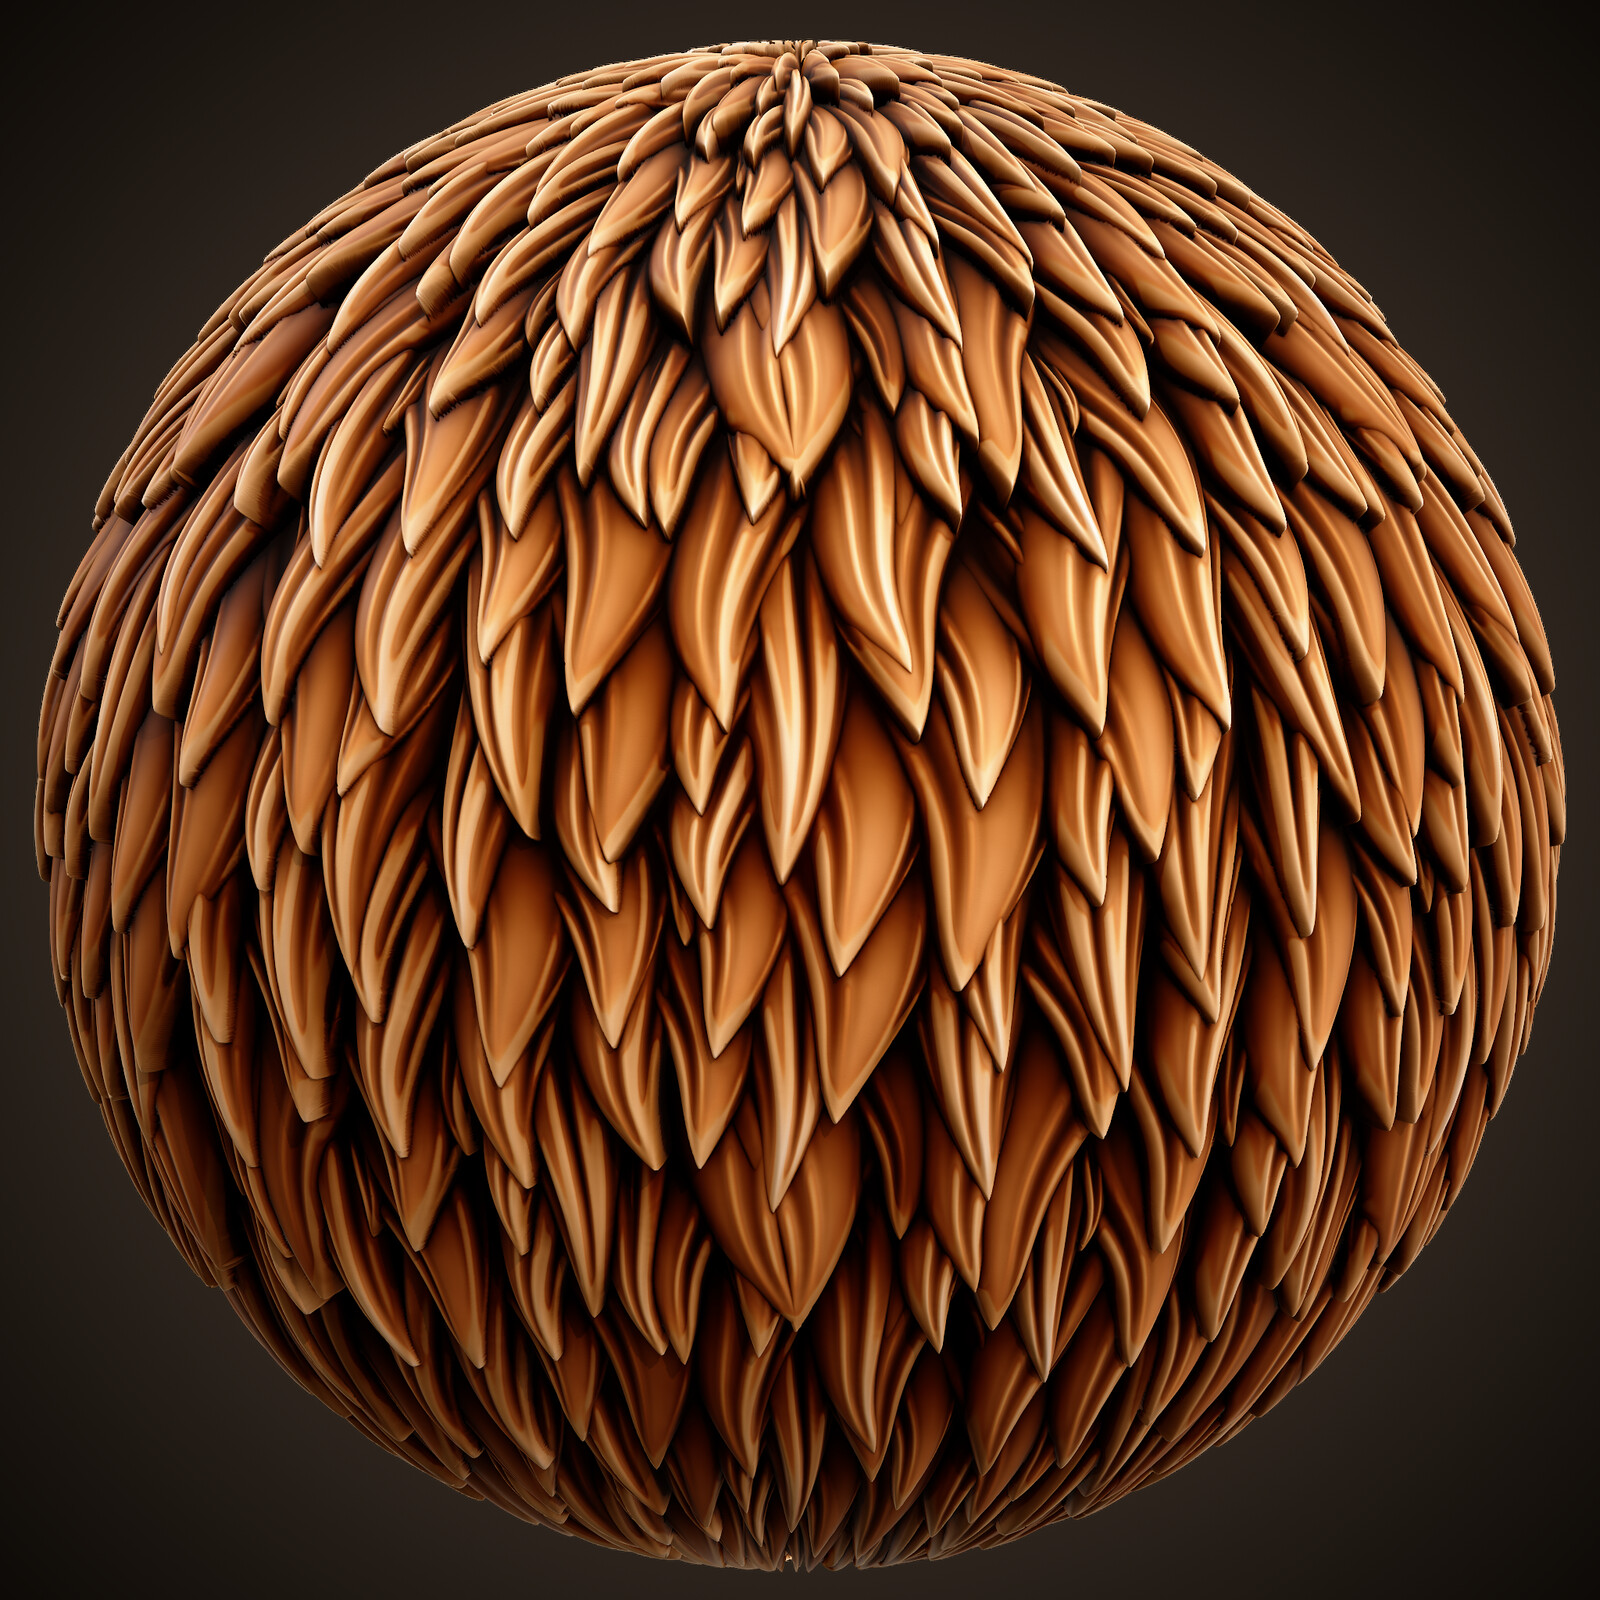 Stylized Procedural Fur and Feather Material